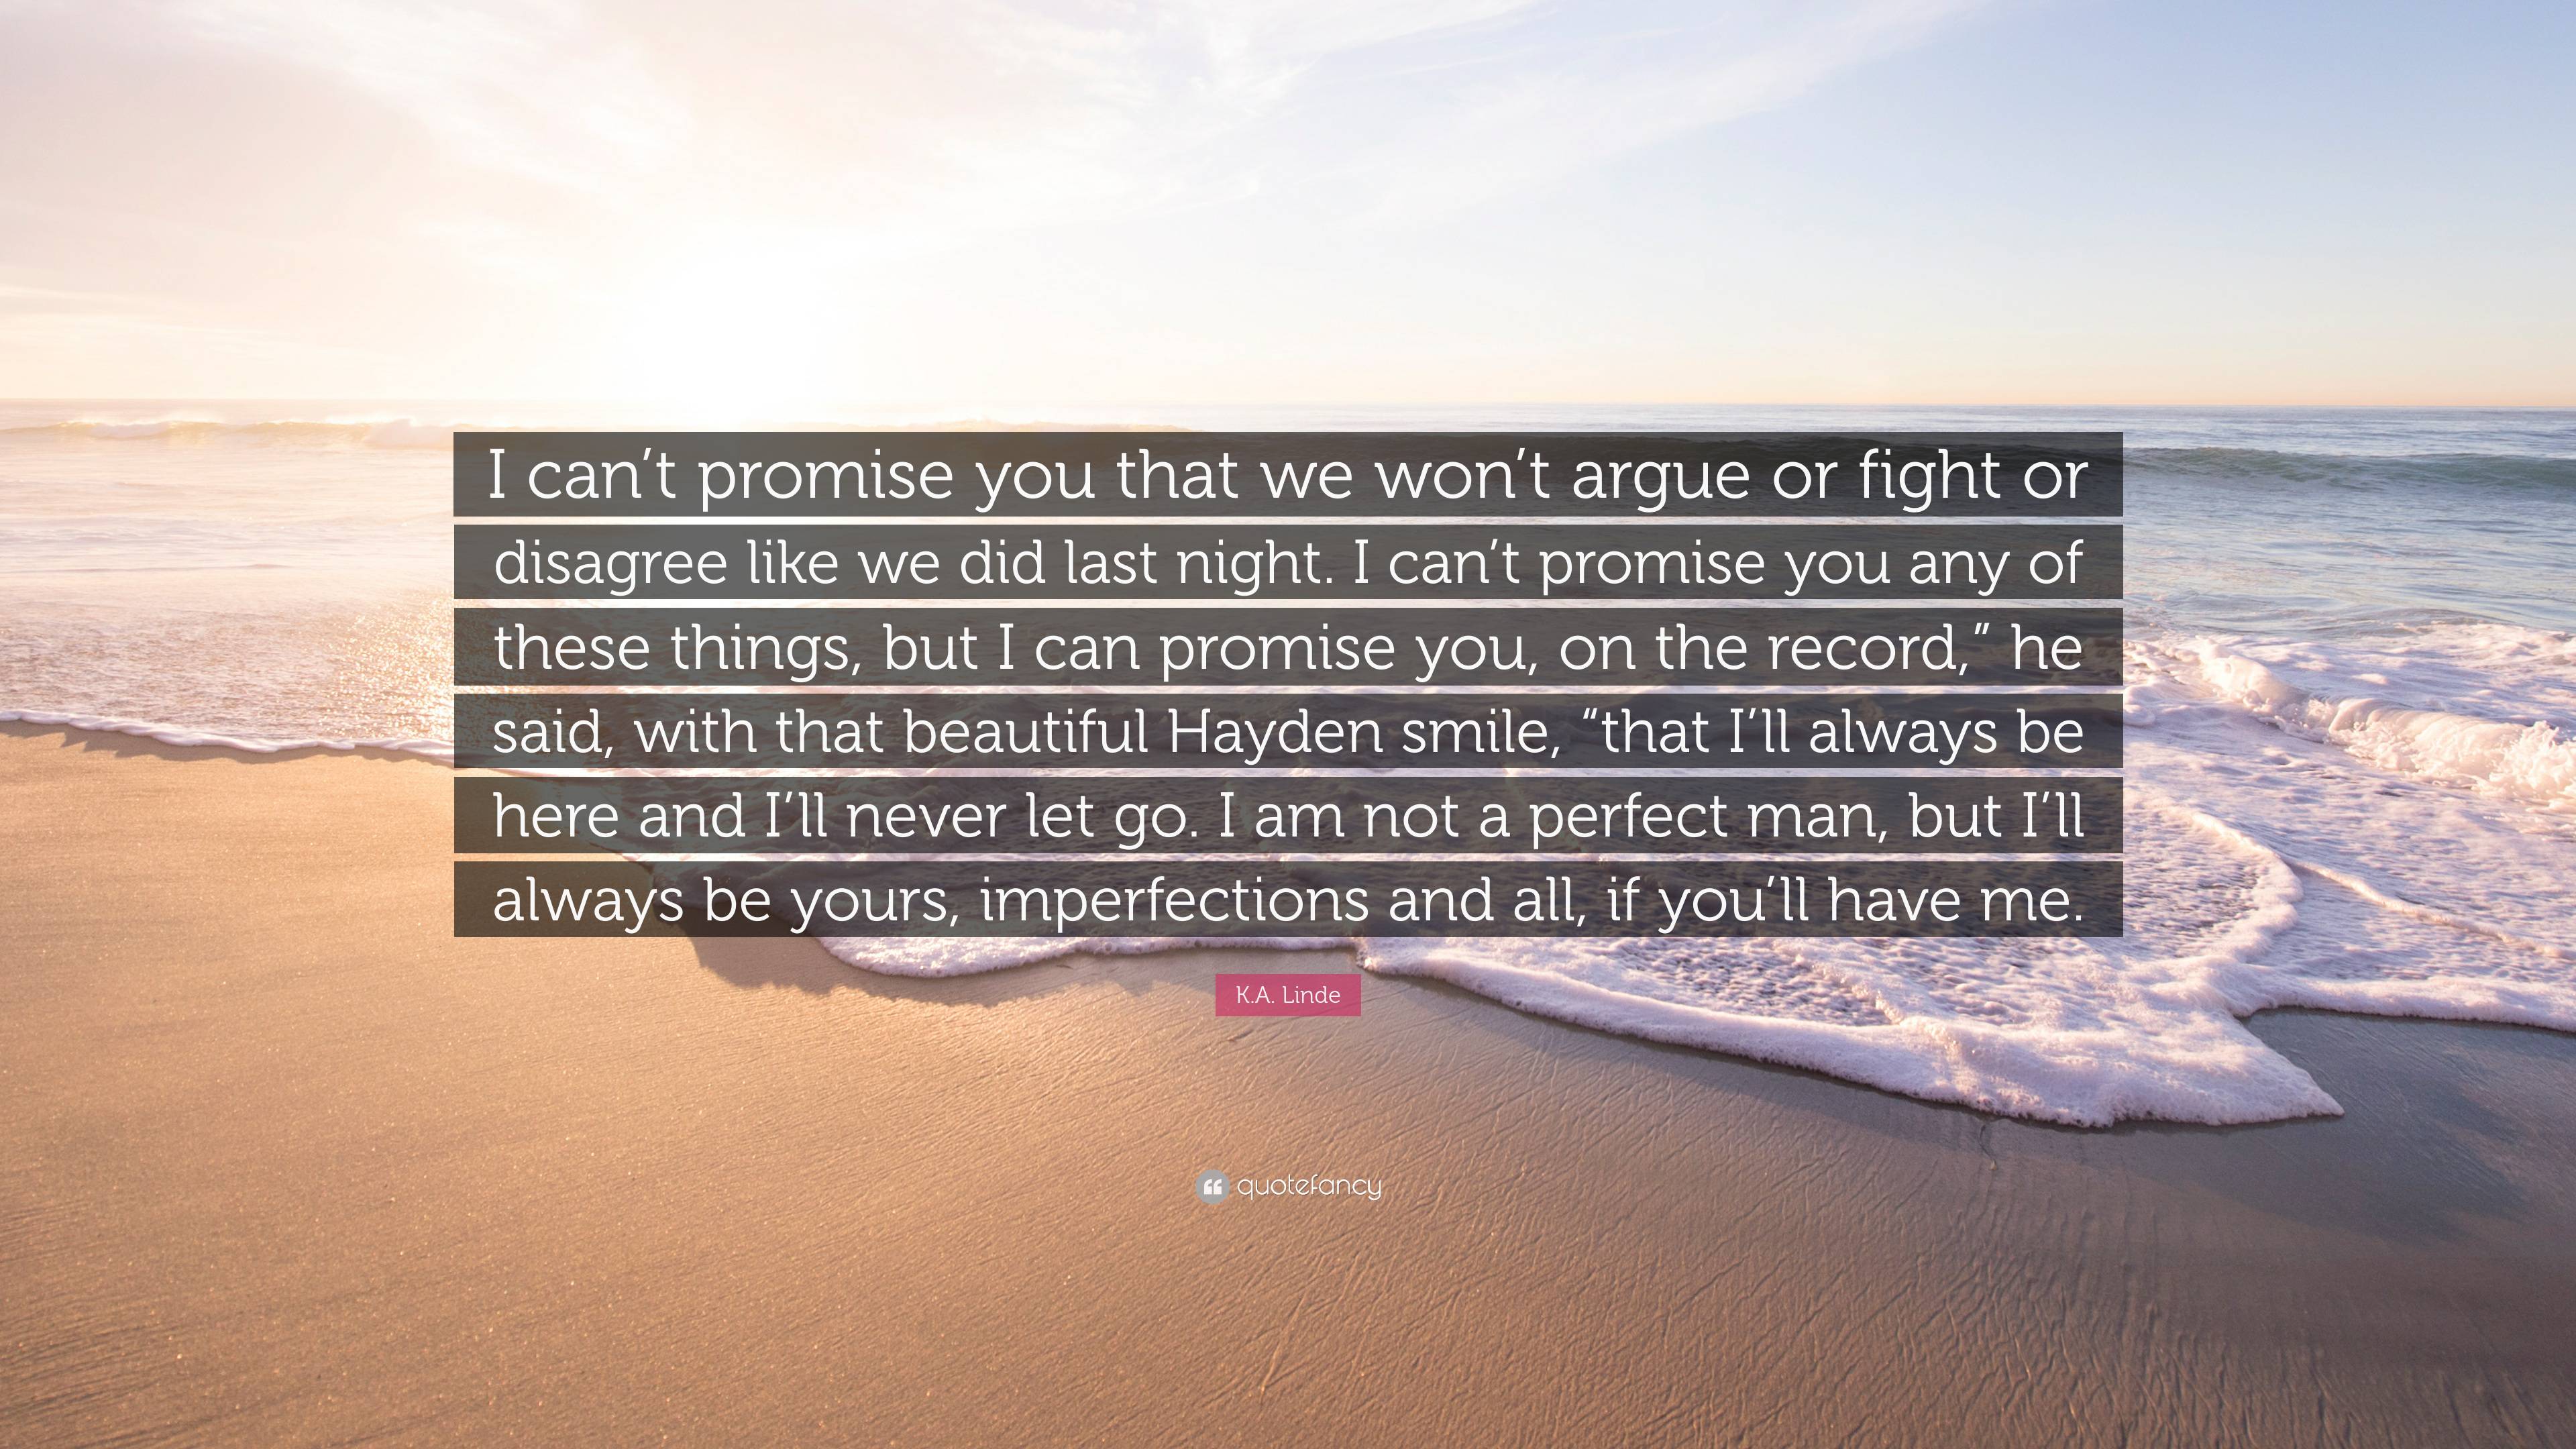 https://quotefancy.com/media/wallpaper/3840x2160/7171465-K-A-Linde-Quote-I-can-t-promise-you-that-we-won-t-argue-or-fight.jpg